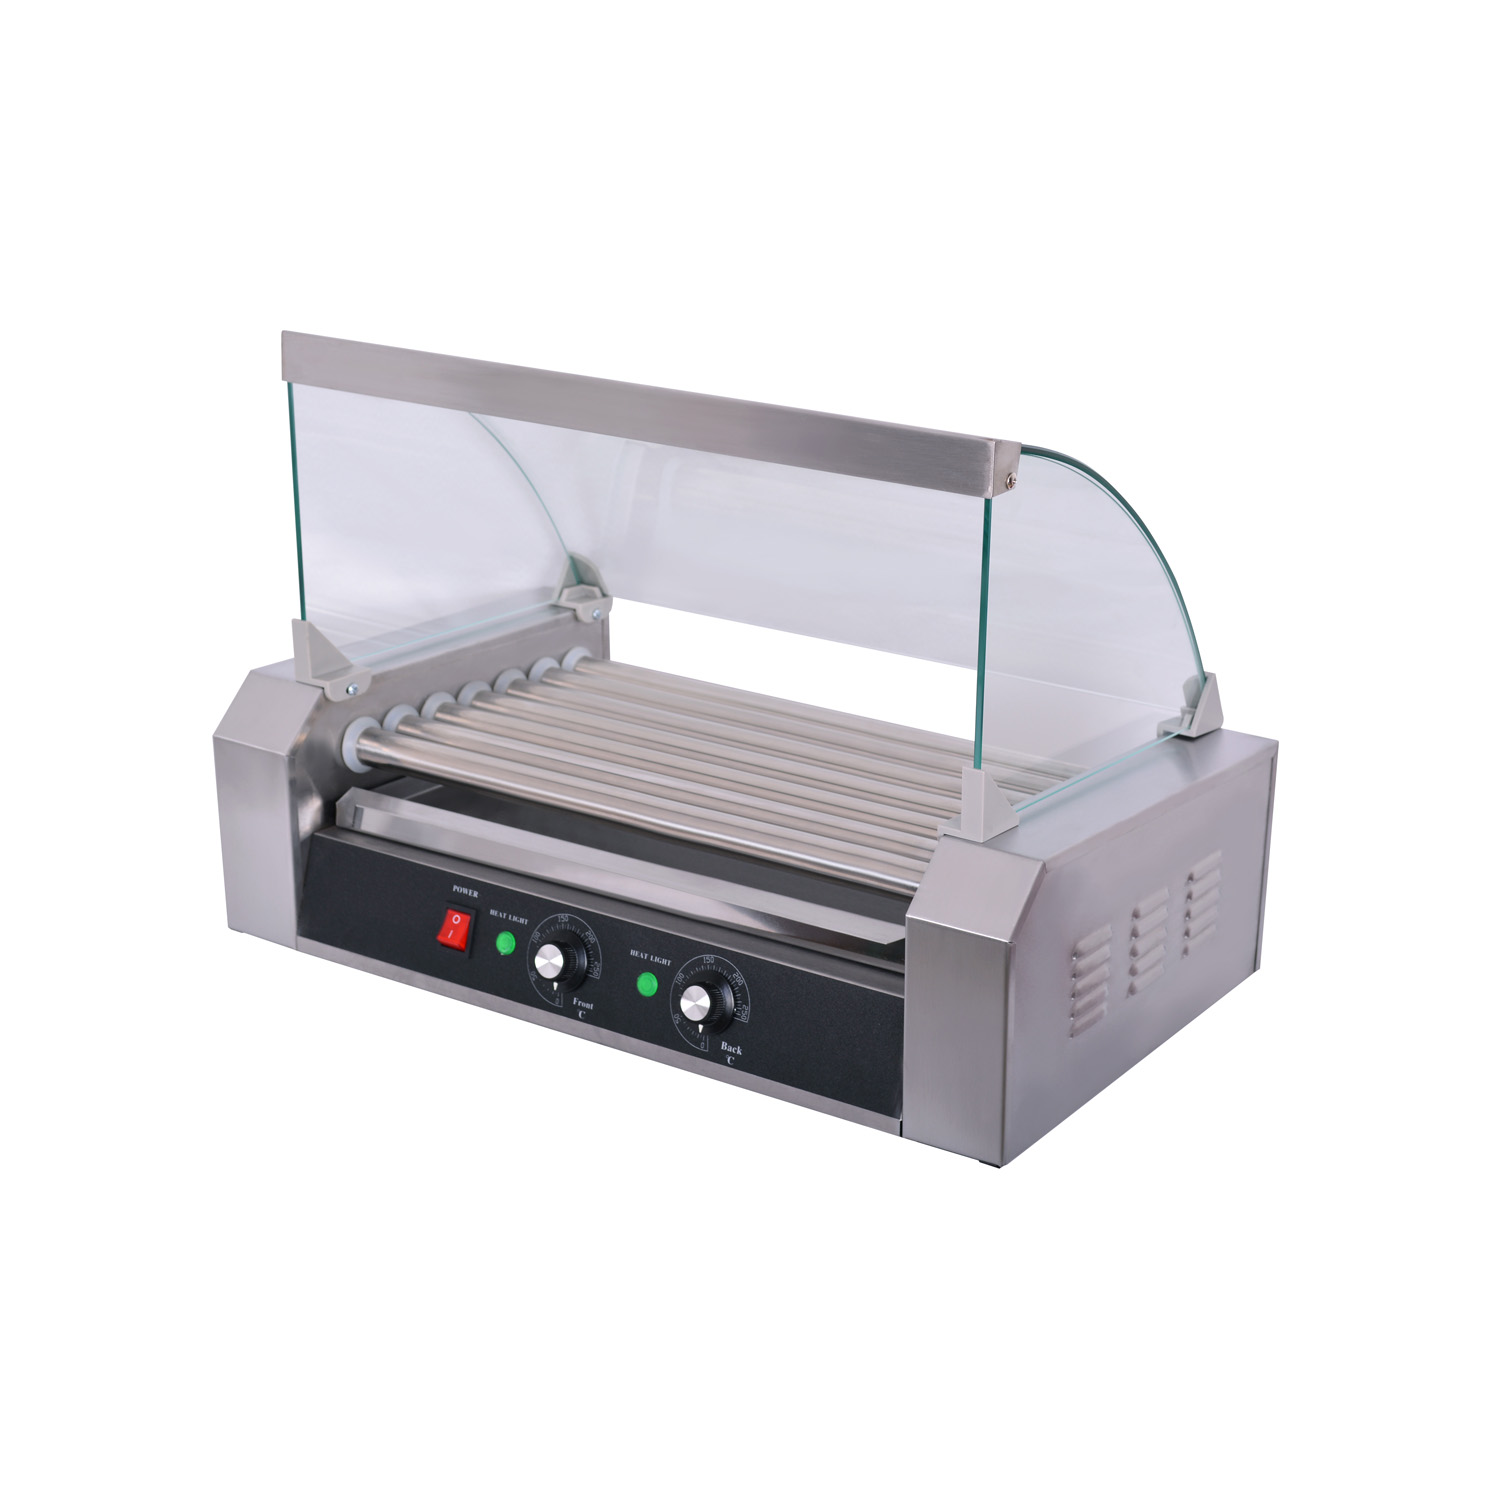 CAC China HDRS-07 7-Roller Hot Dog Roller Grill 110V/900W